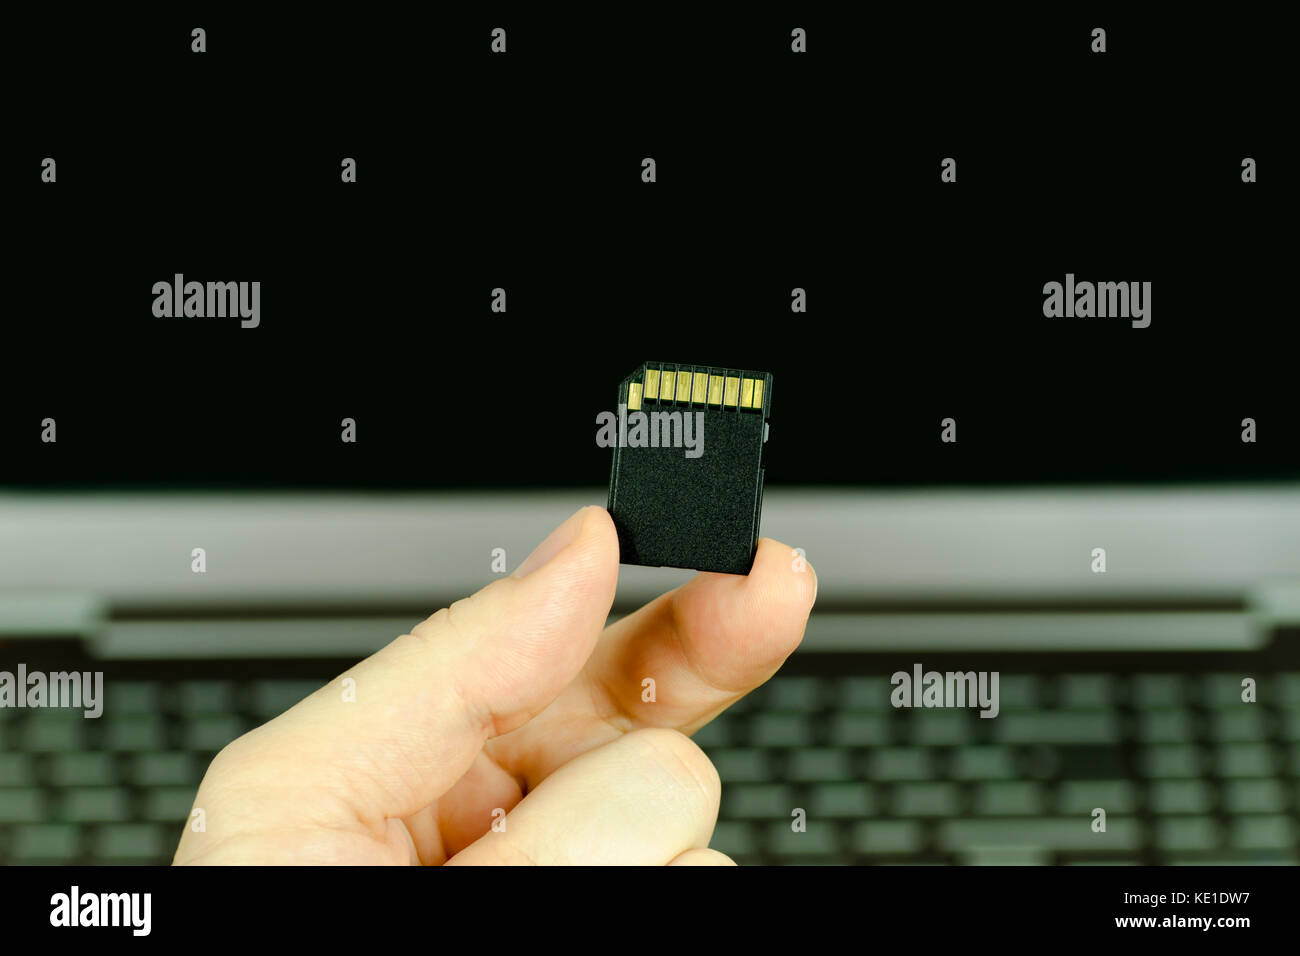 Close-up view of a hand holding a black SD memory card with a background laptop, isolated in the background Stock Photo